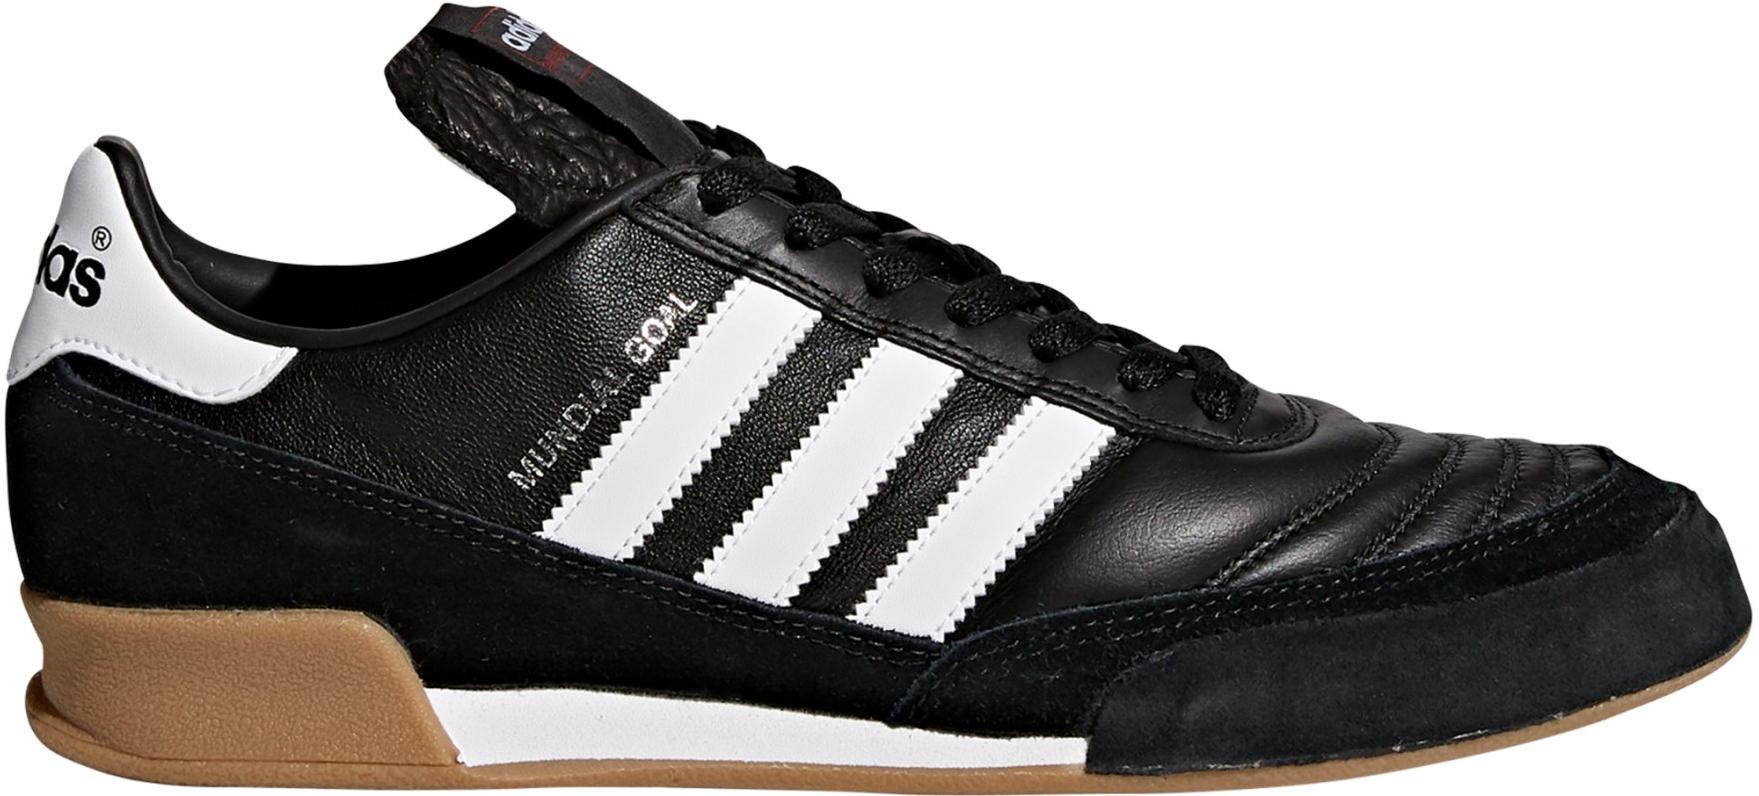 Indoor/court shoes adidas Mundial Goal IN